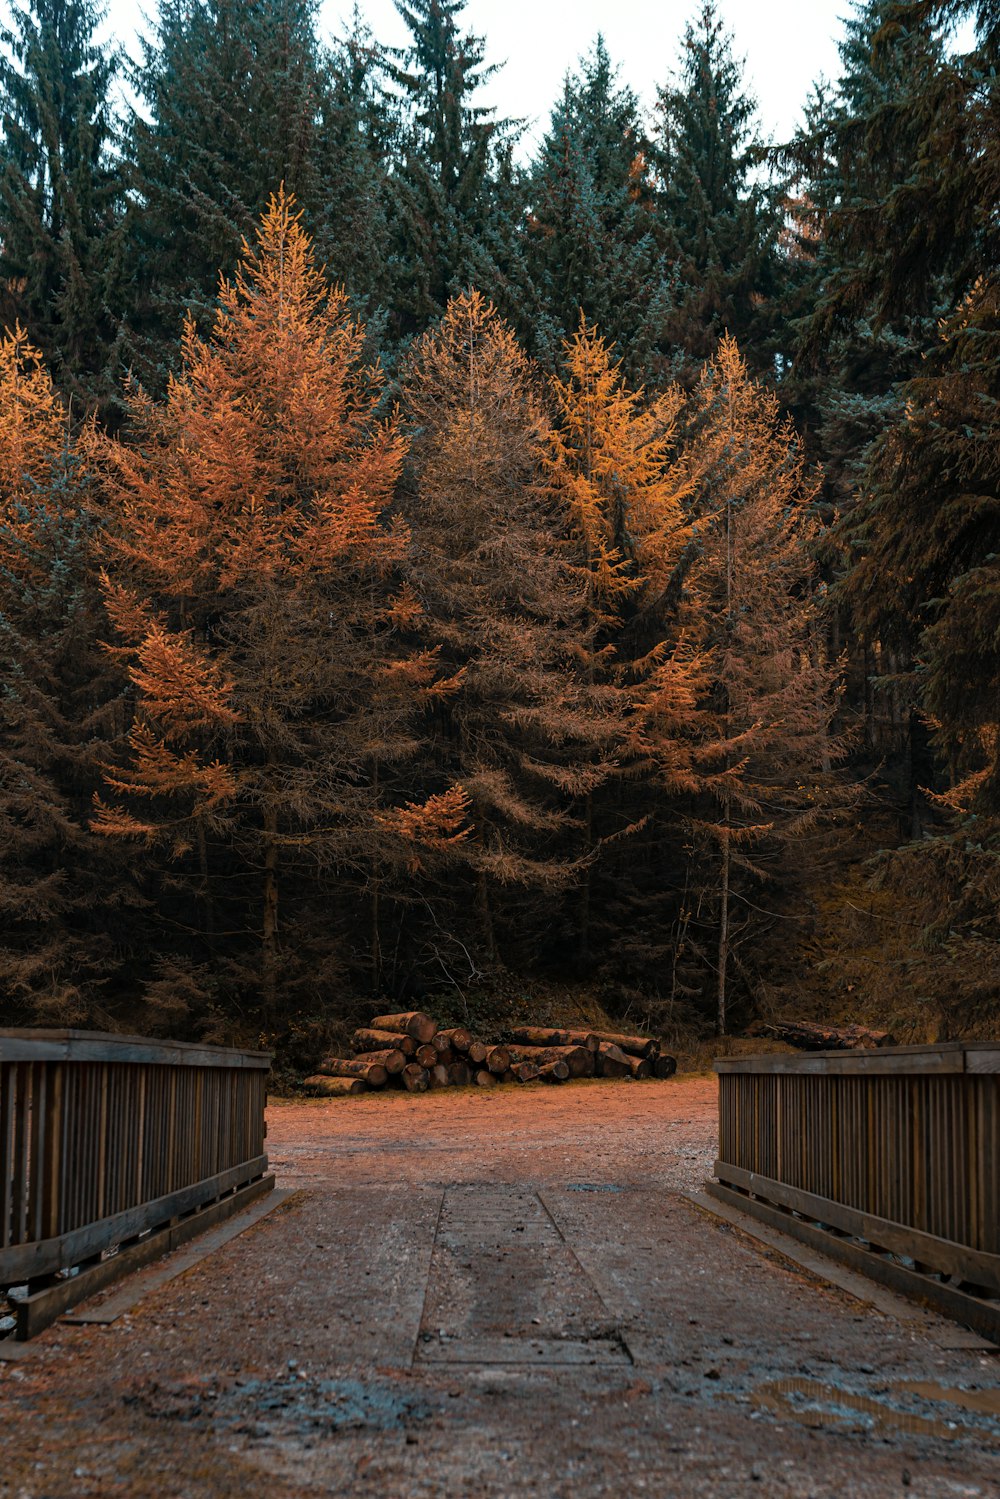 a wooden bridge over a dirt road surrounded by trees